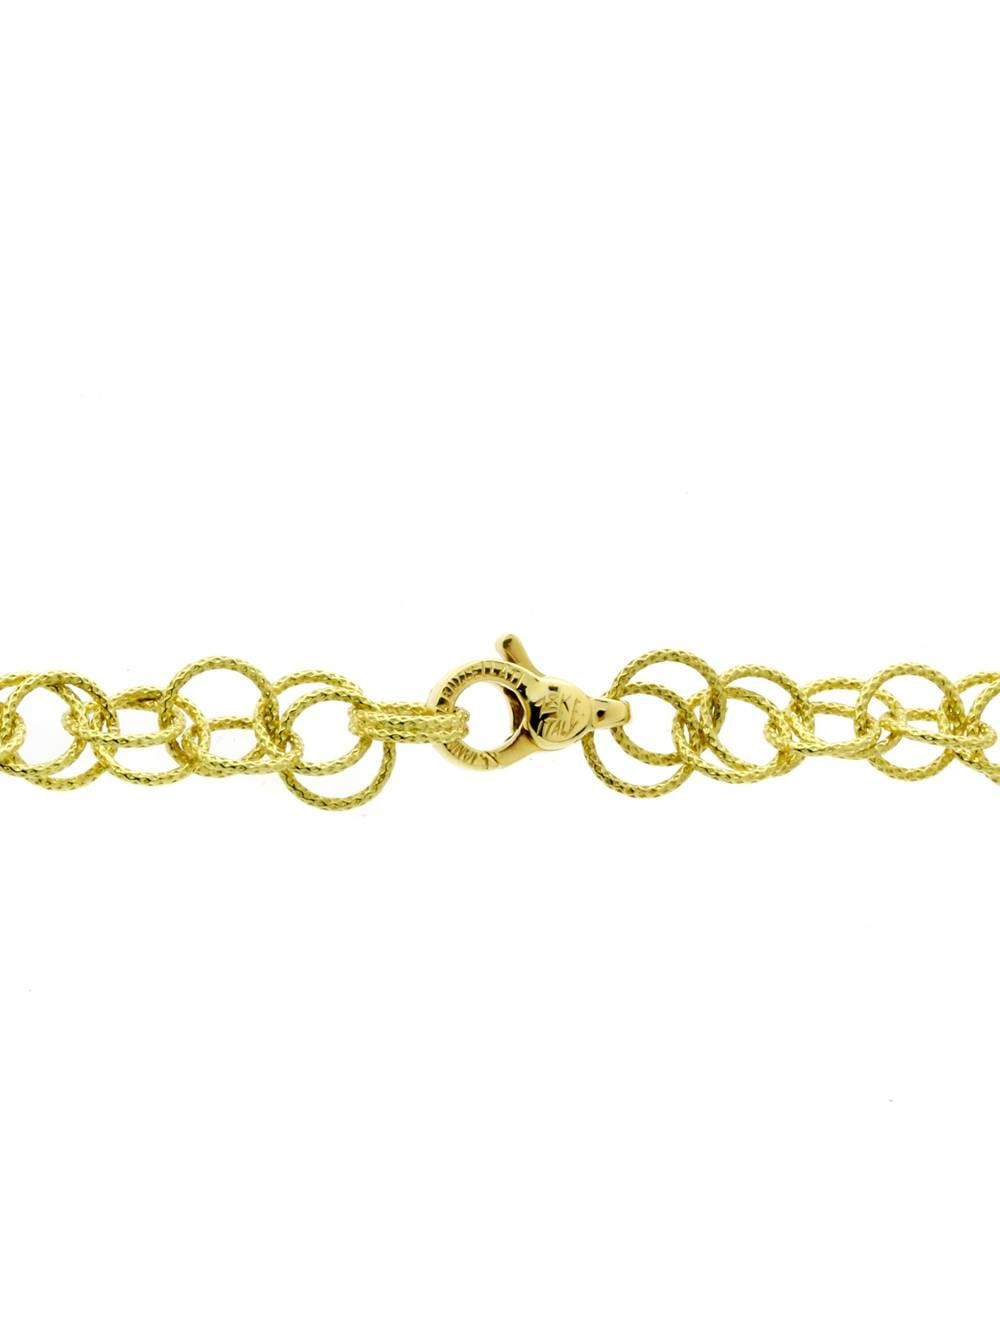 A stunning hand made necklace by Buccellati featuring a double link pattern crafted in 18k yellow gold. A sophisticated yet light and airy necklace perfect for everyday wear. By adding this tasteful necklace to your jewelry collection, you’ll have